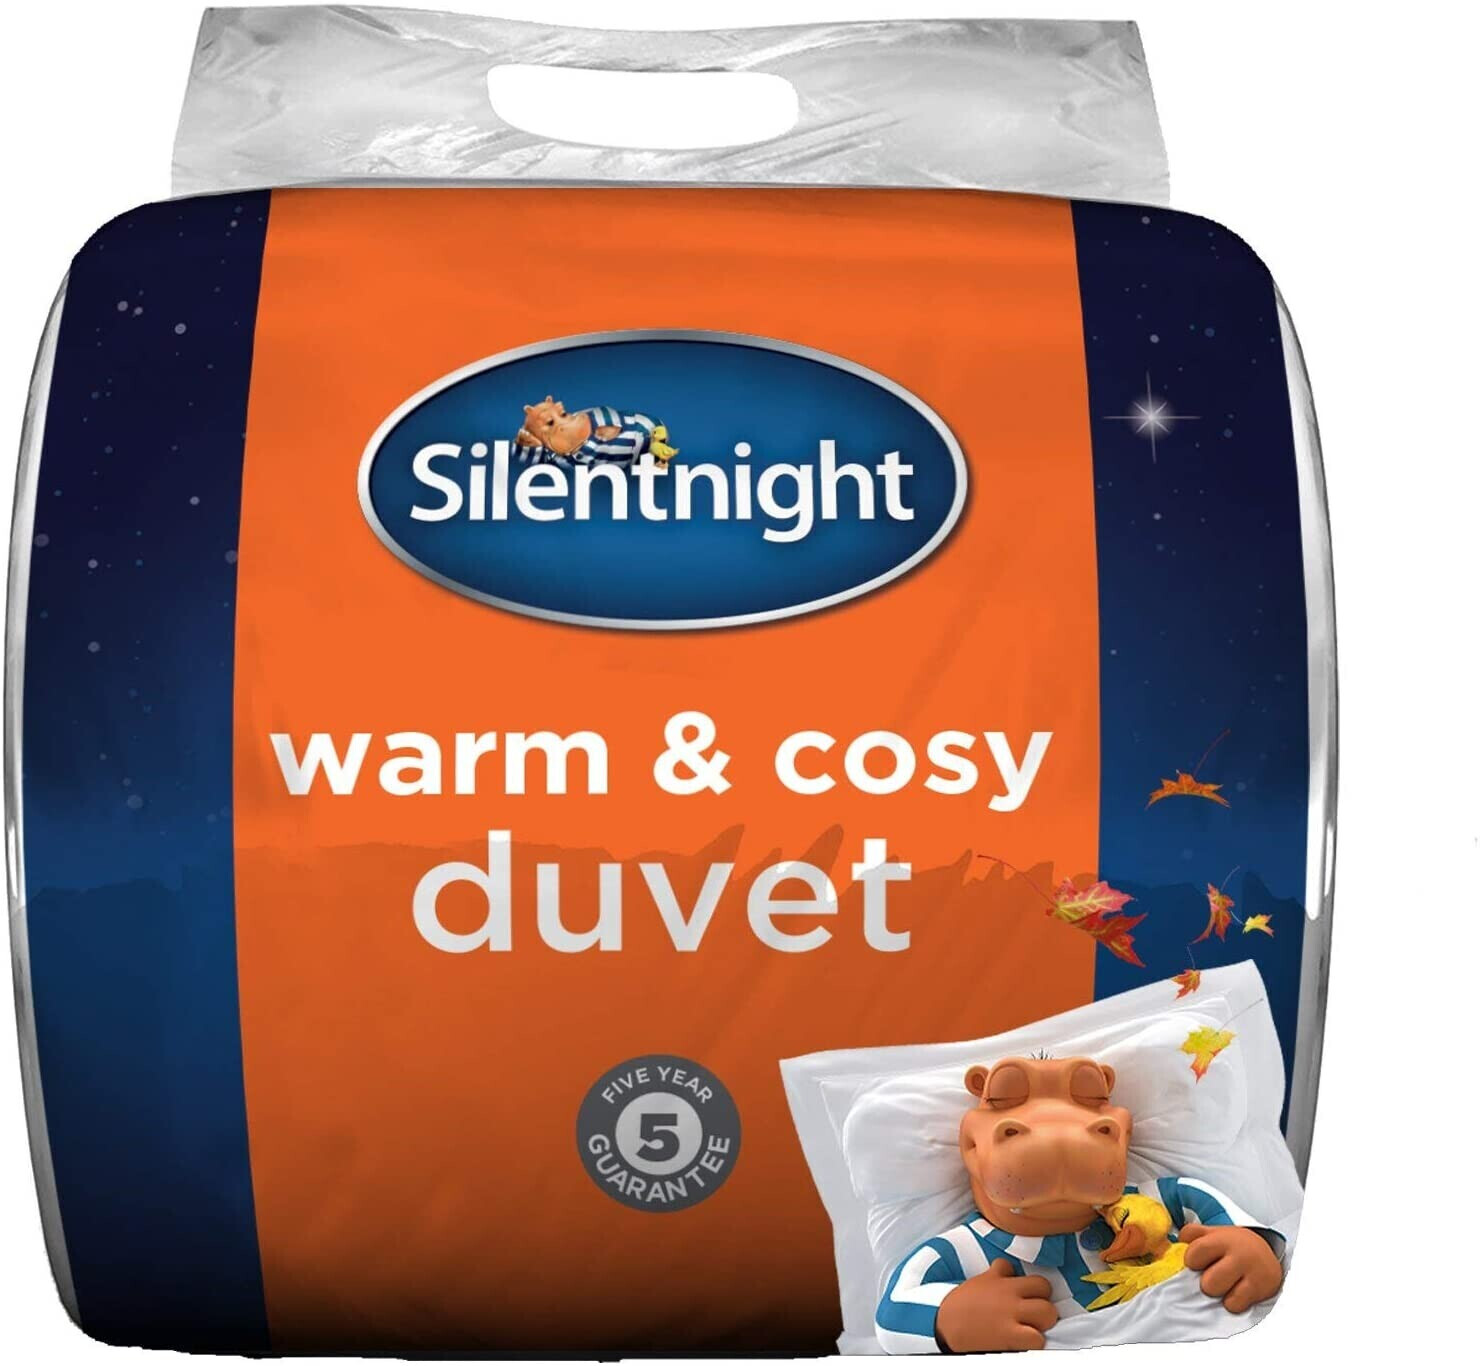 Photos - Duvet Silentnight Warm And Cosy 13.5 Tog  Winter - Double 